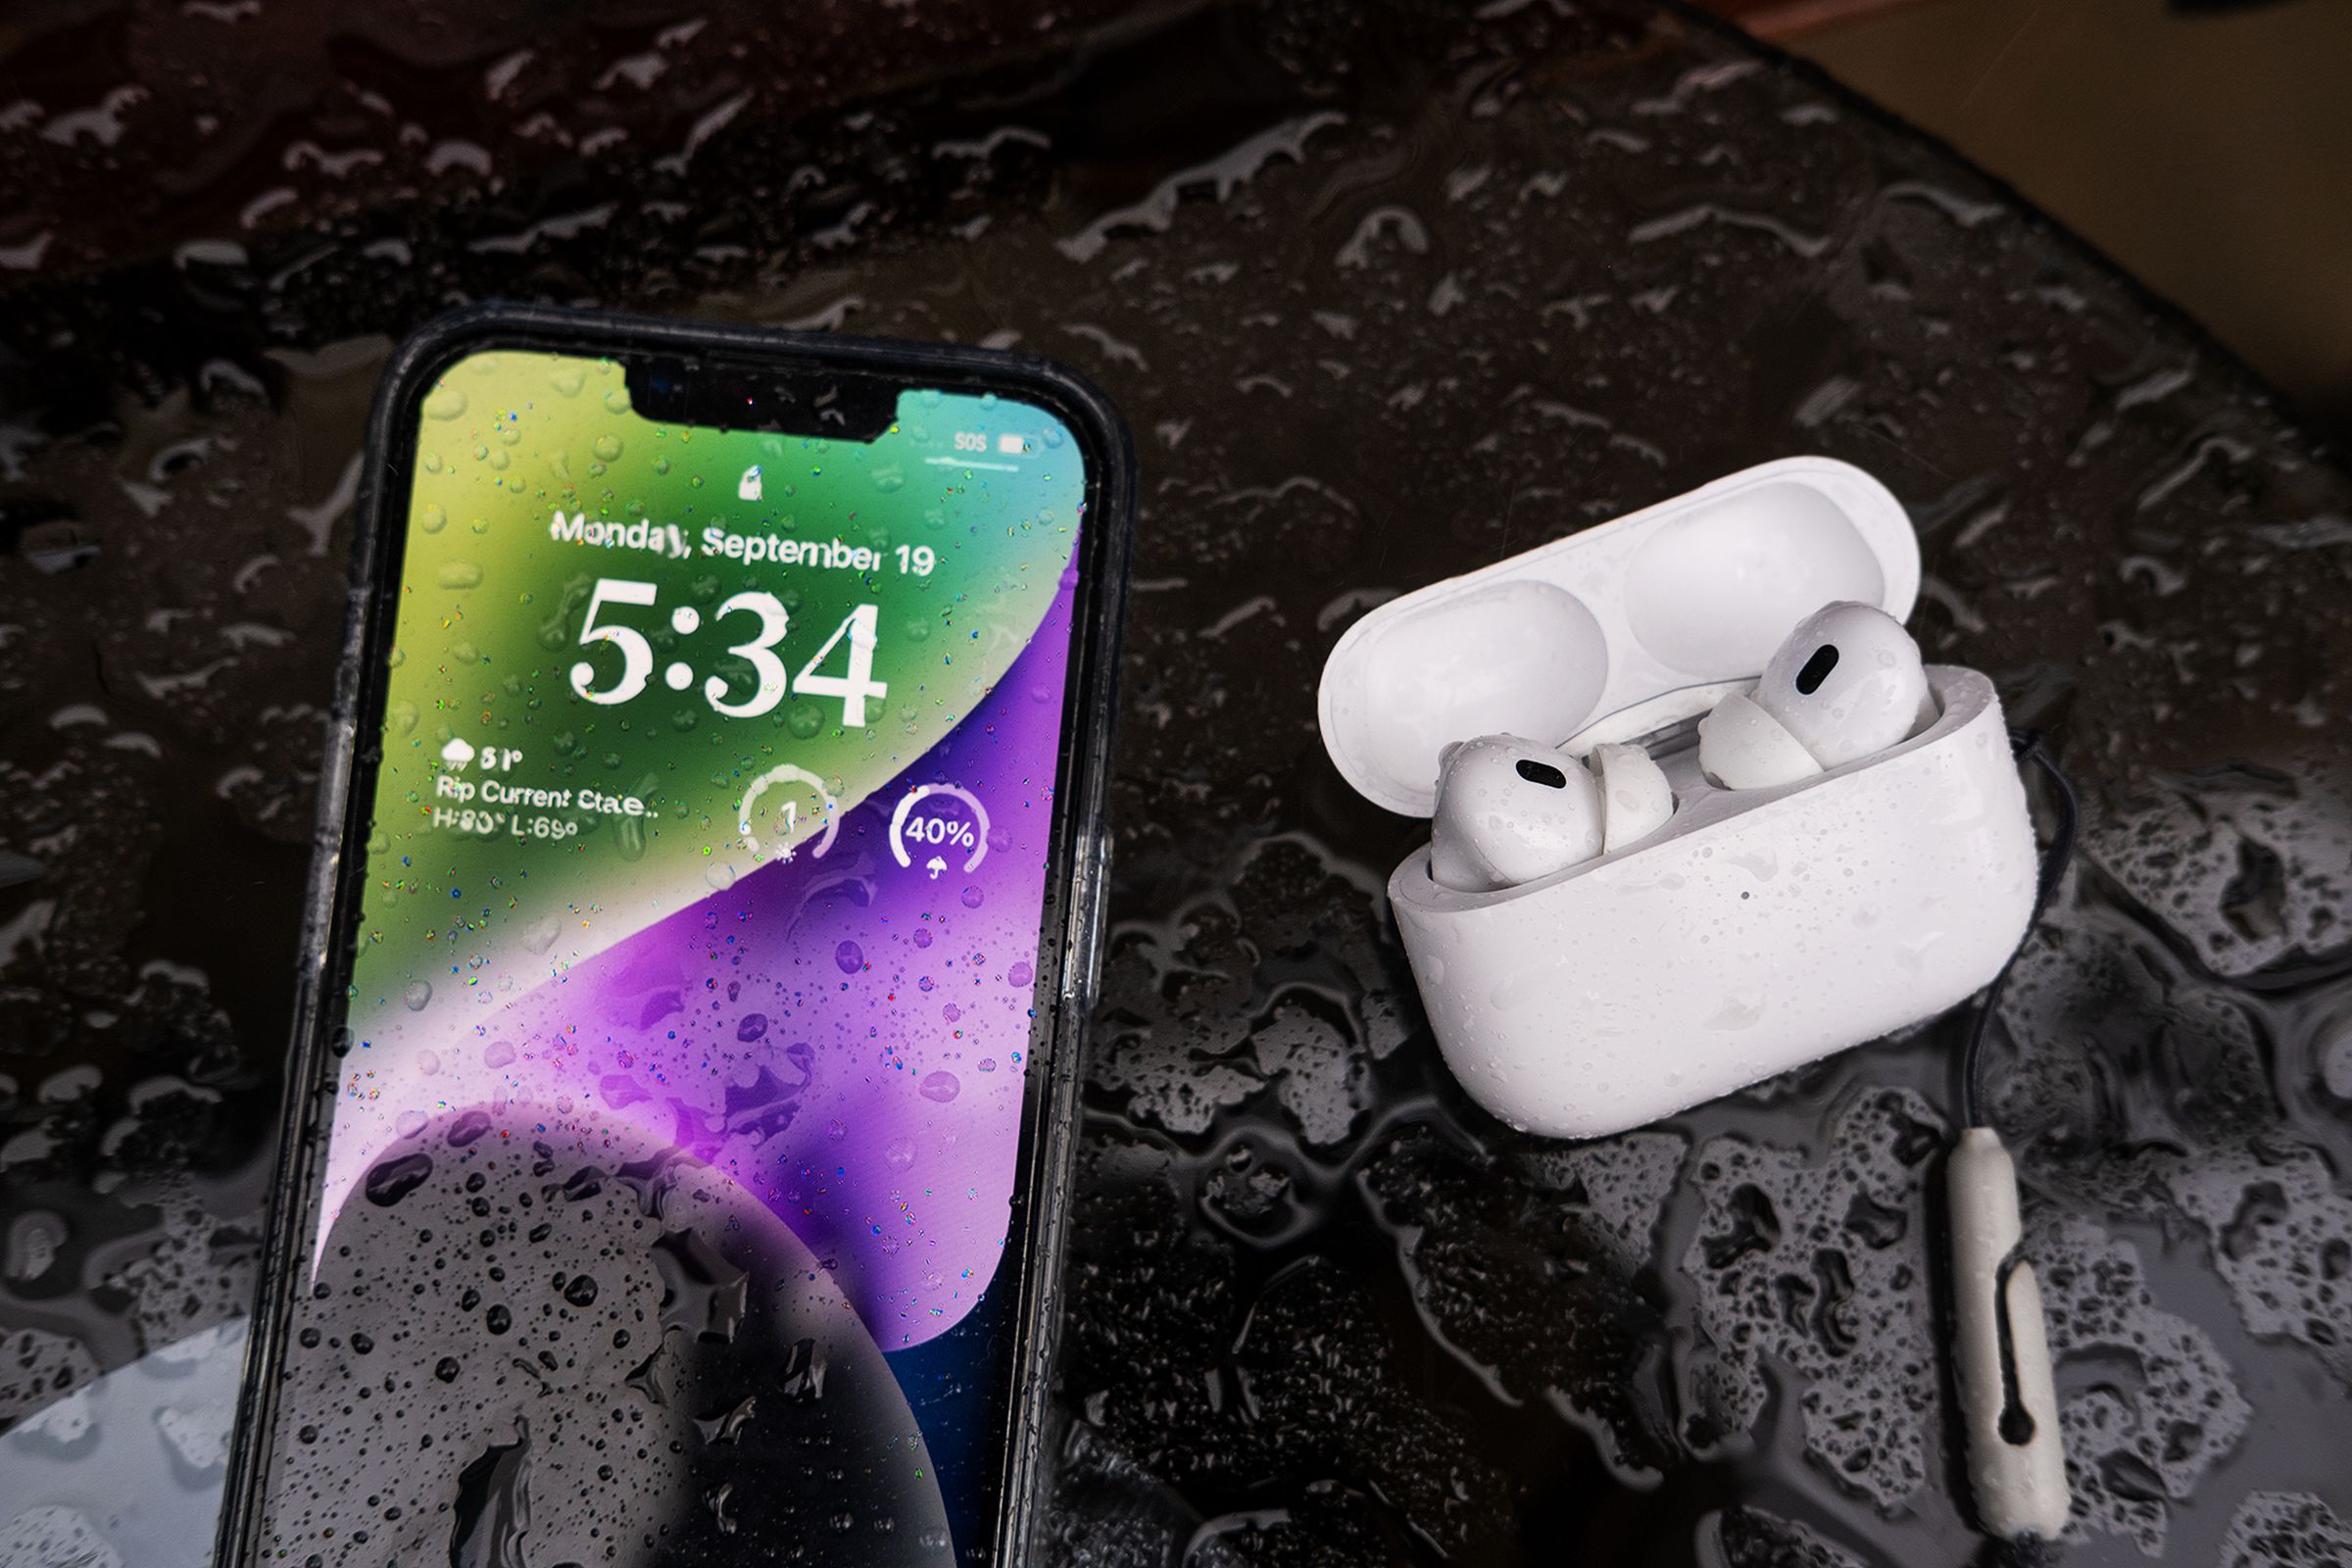 A photo of the iPhone 14 next to Apple’s second-generation AirPods Pro. Both devices are wet with visible raindrops on them.